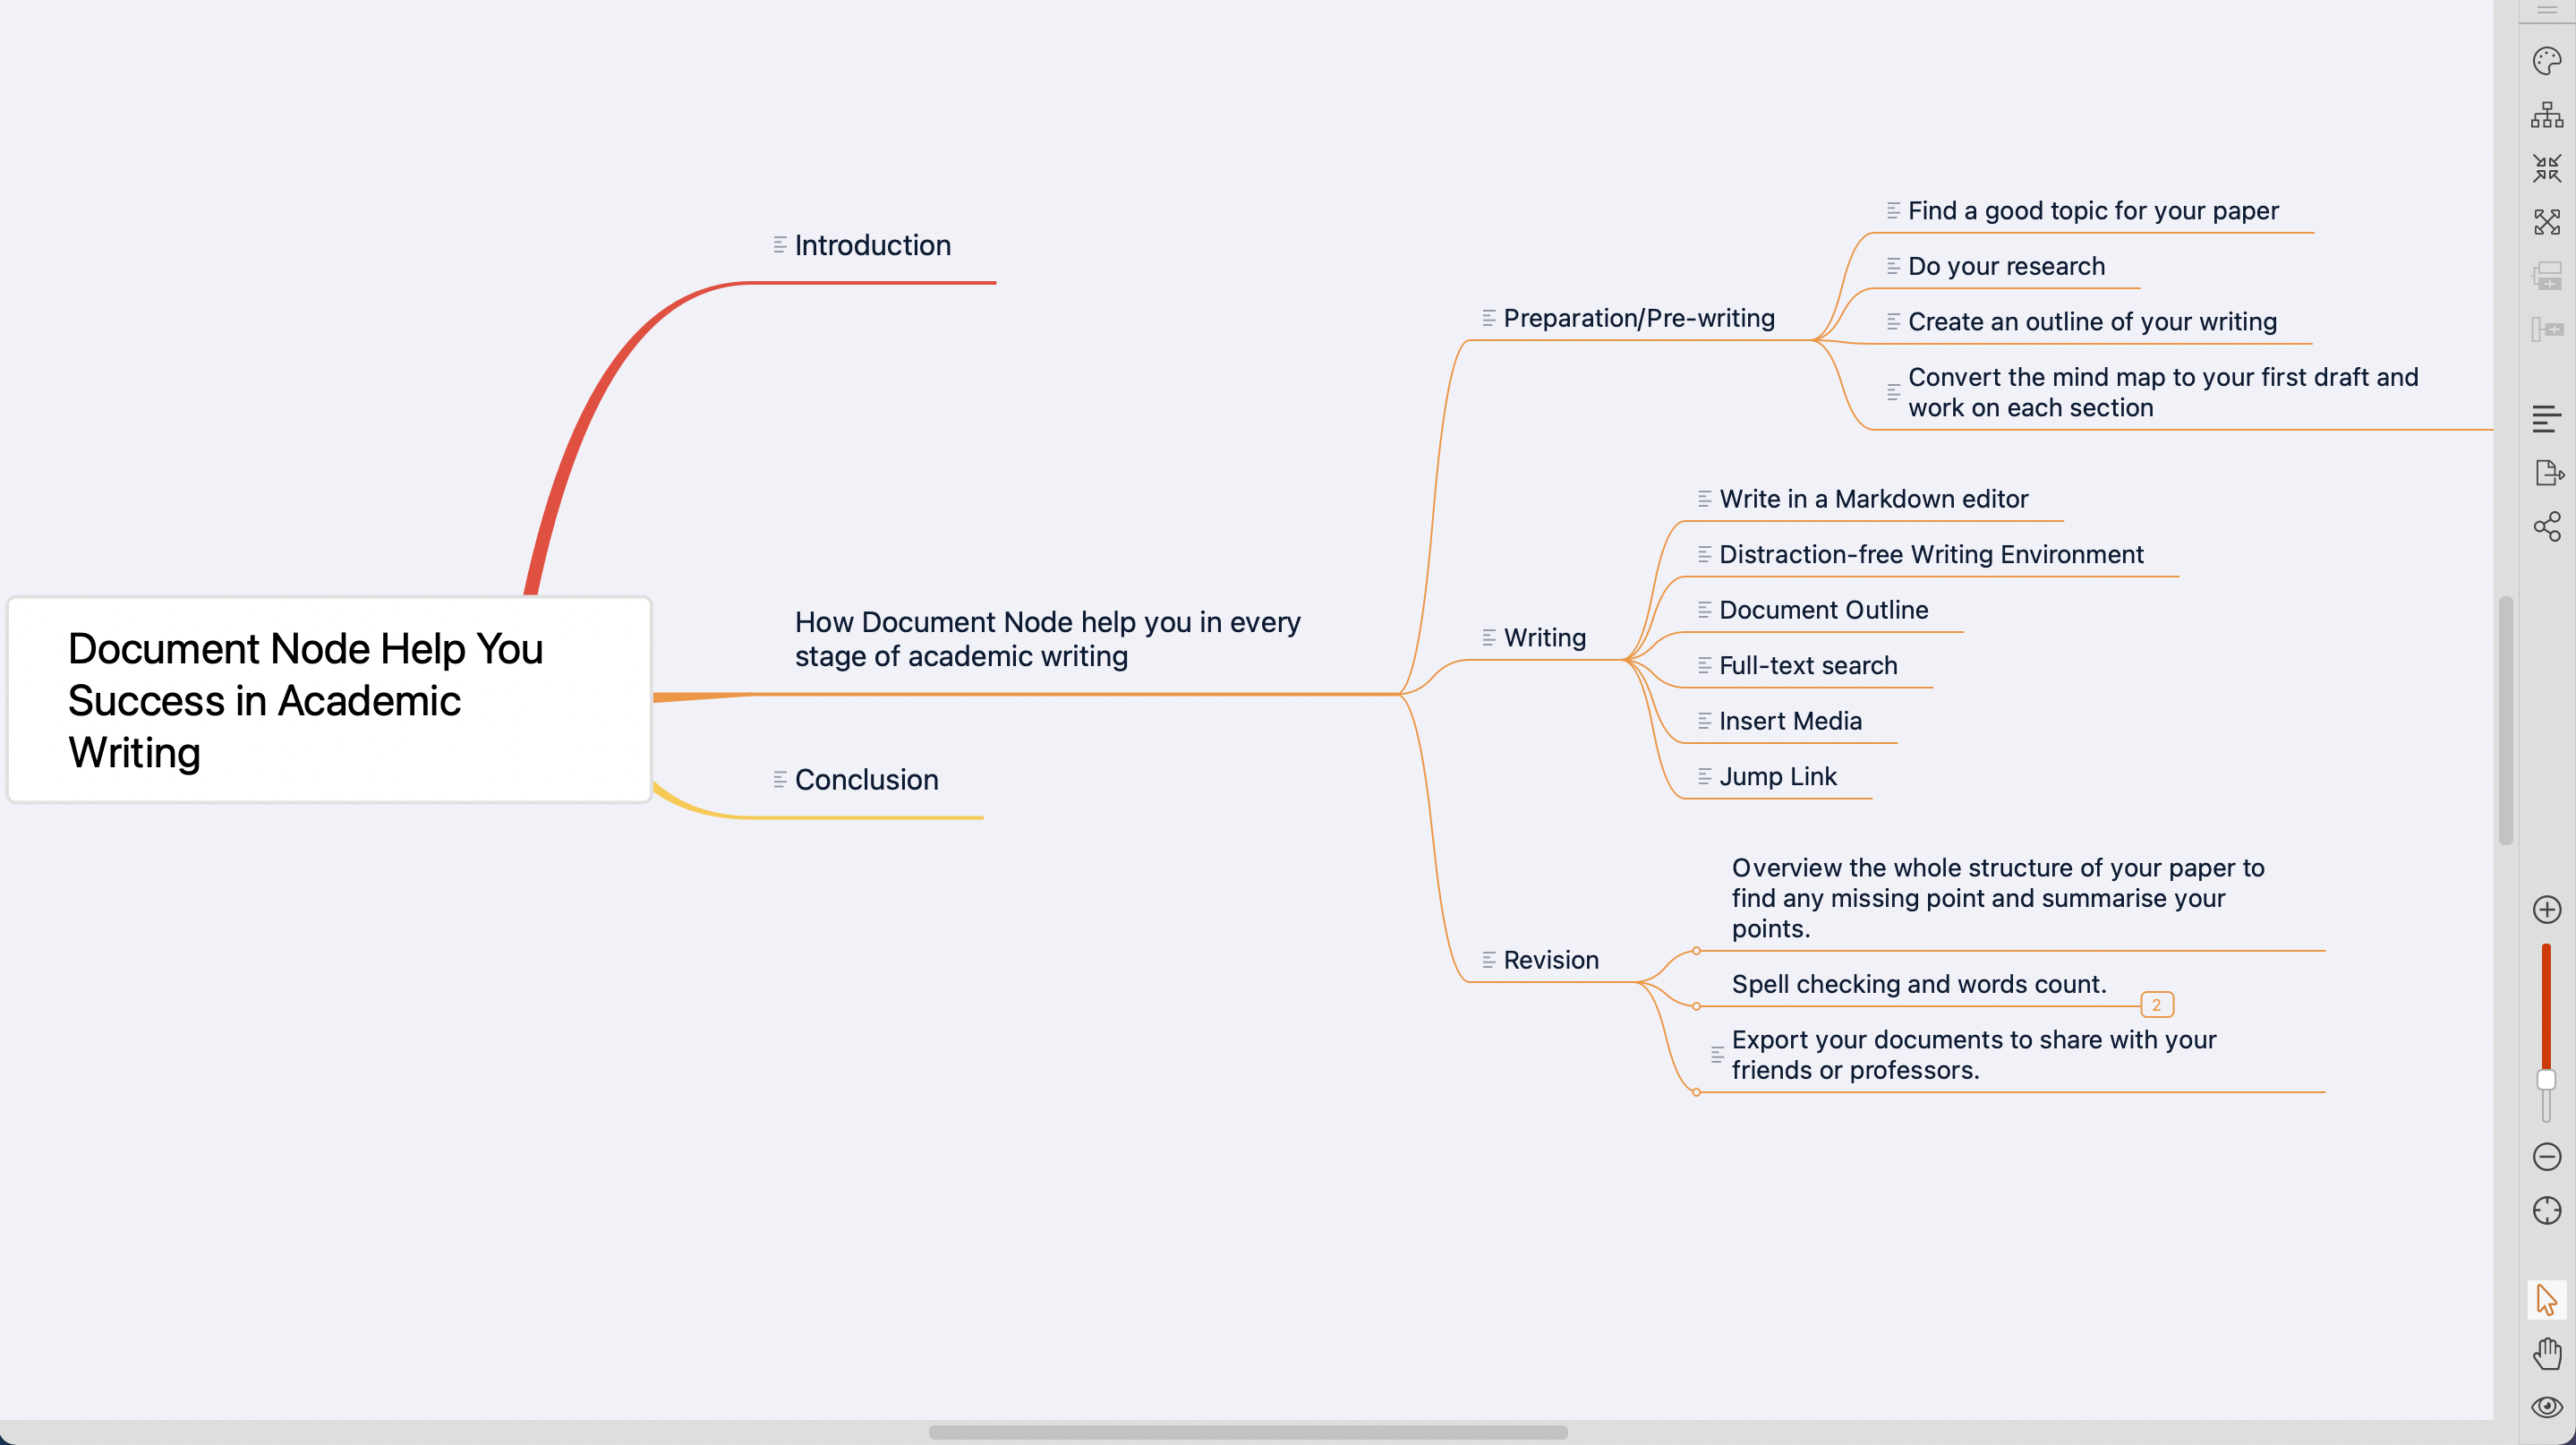 over view the whole document with your Mind Map